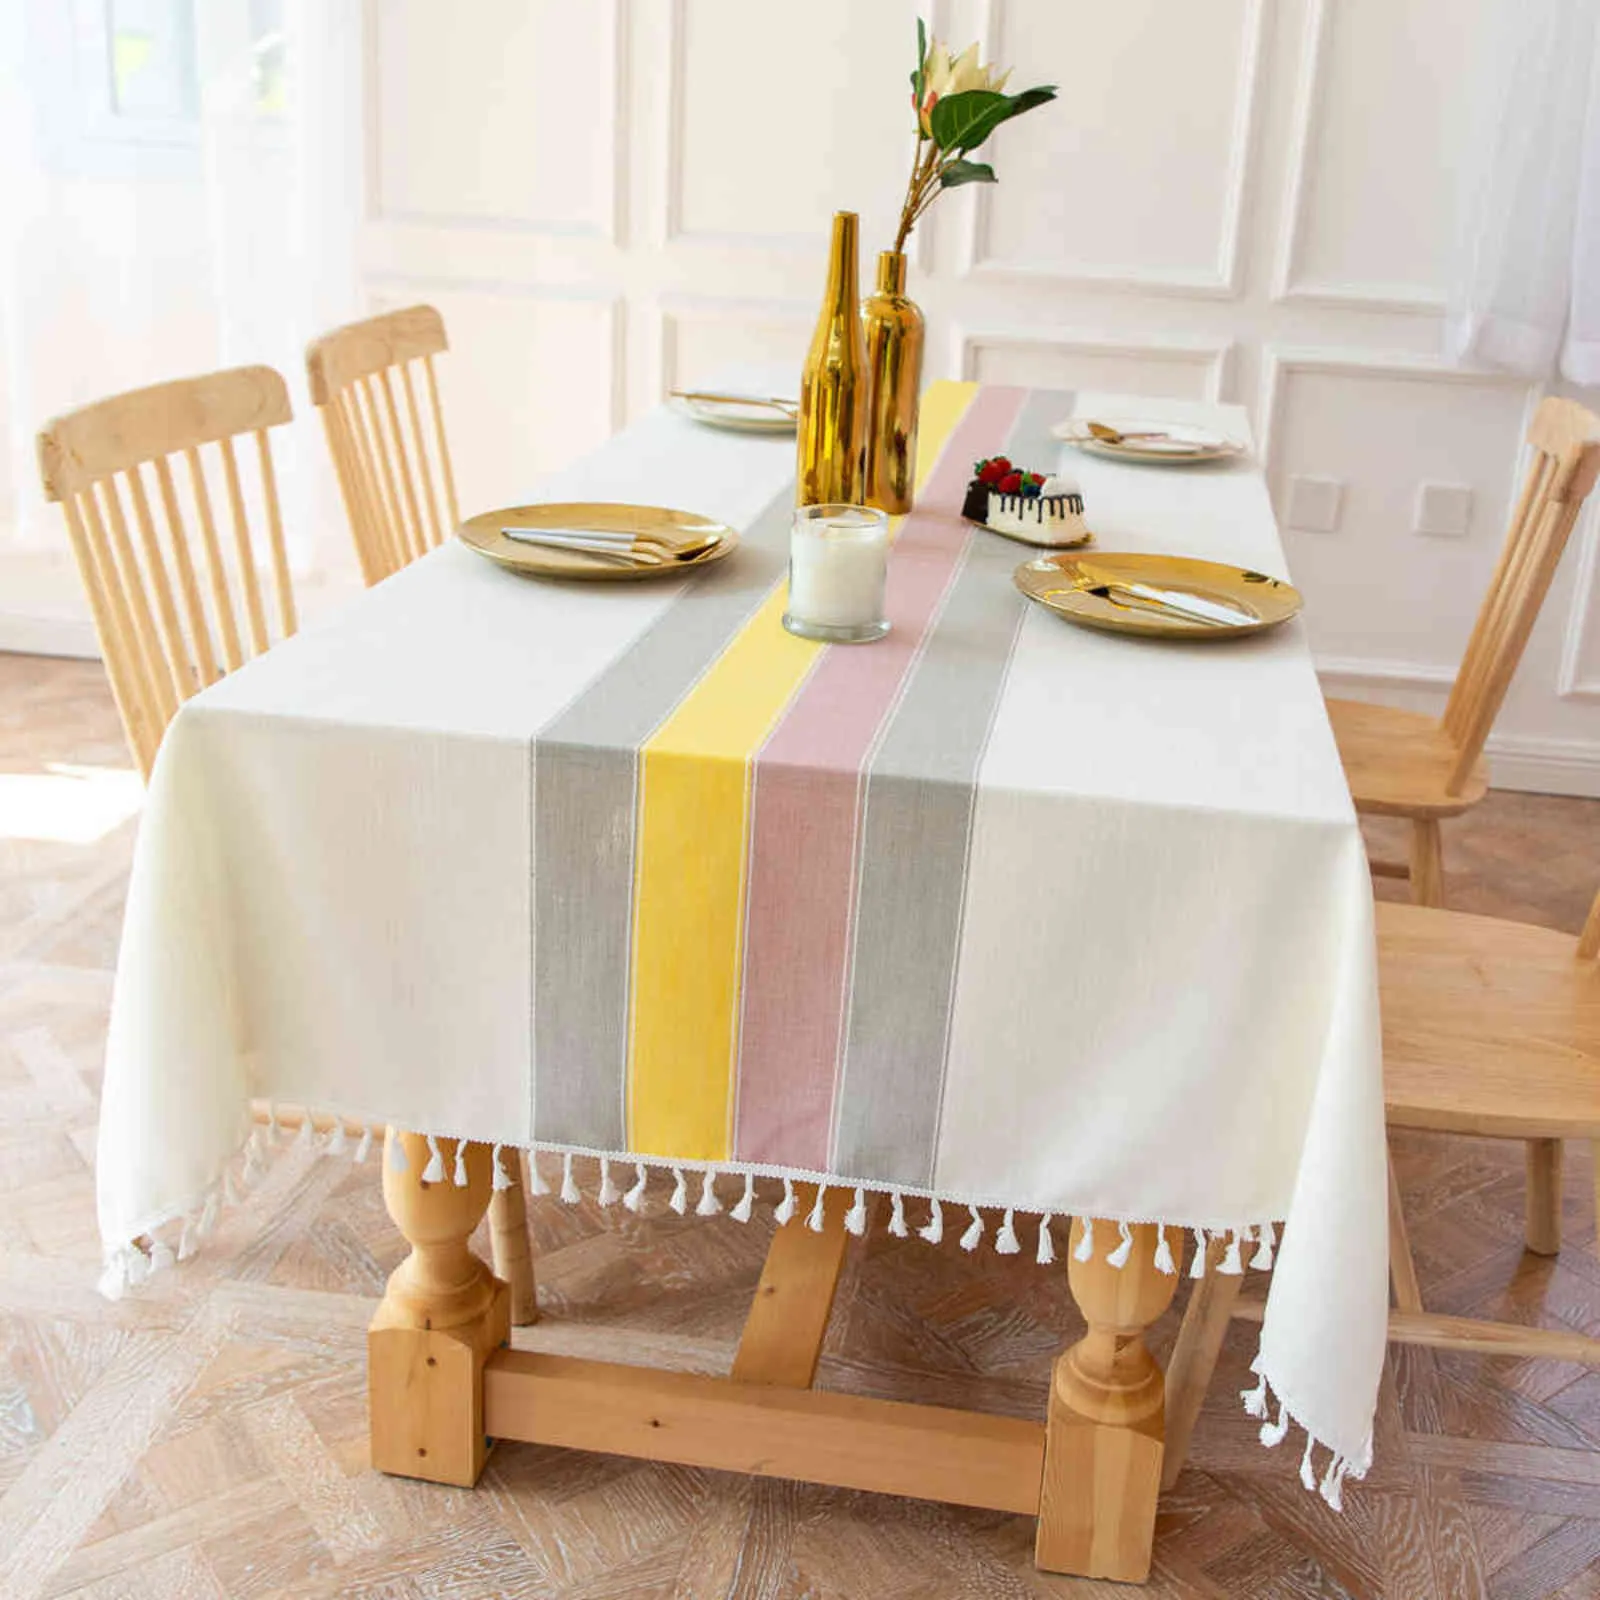 Nordic Christmas Party Tablecloth Grey Striped Upscale Cotton Linen Stitching Tassel Rectangular cloth el Cover 211103